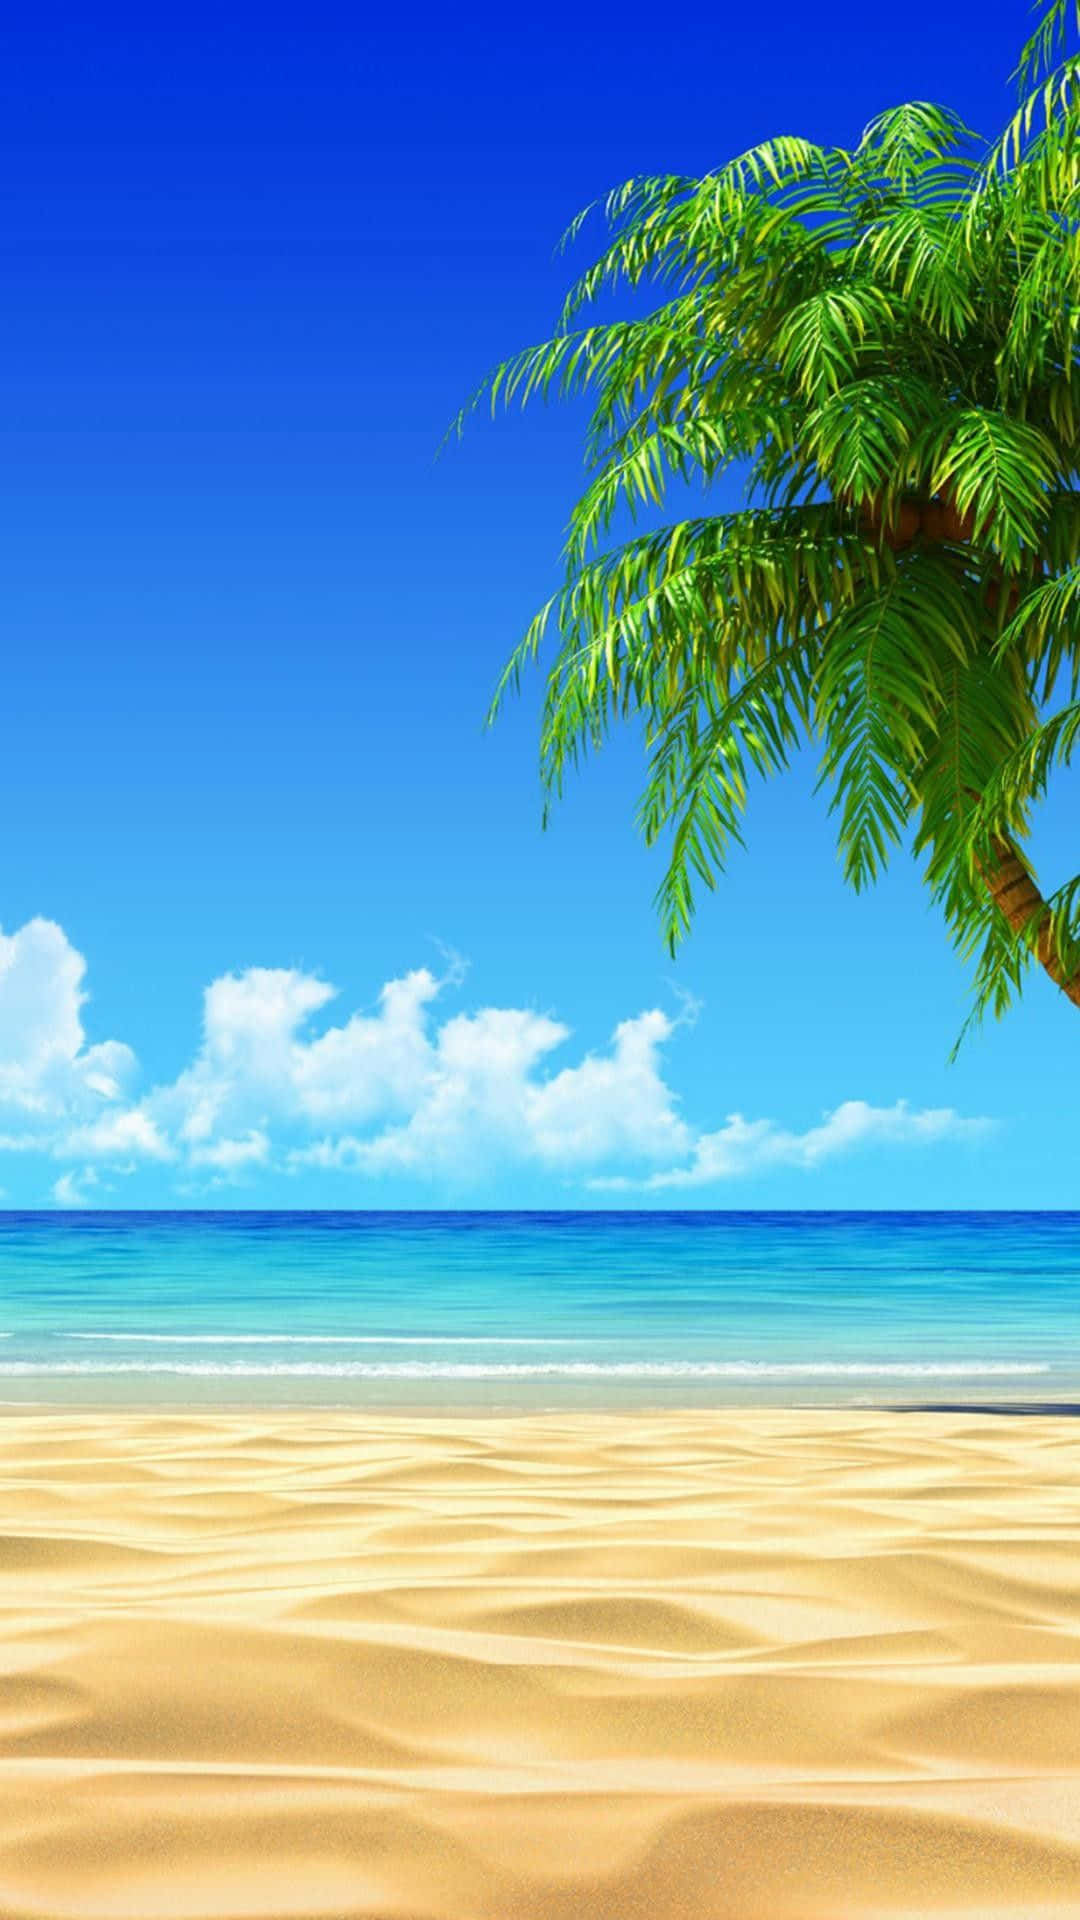 “Enjoy the Beautiful Beach with Your Iphone” Wallpaper